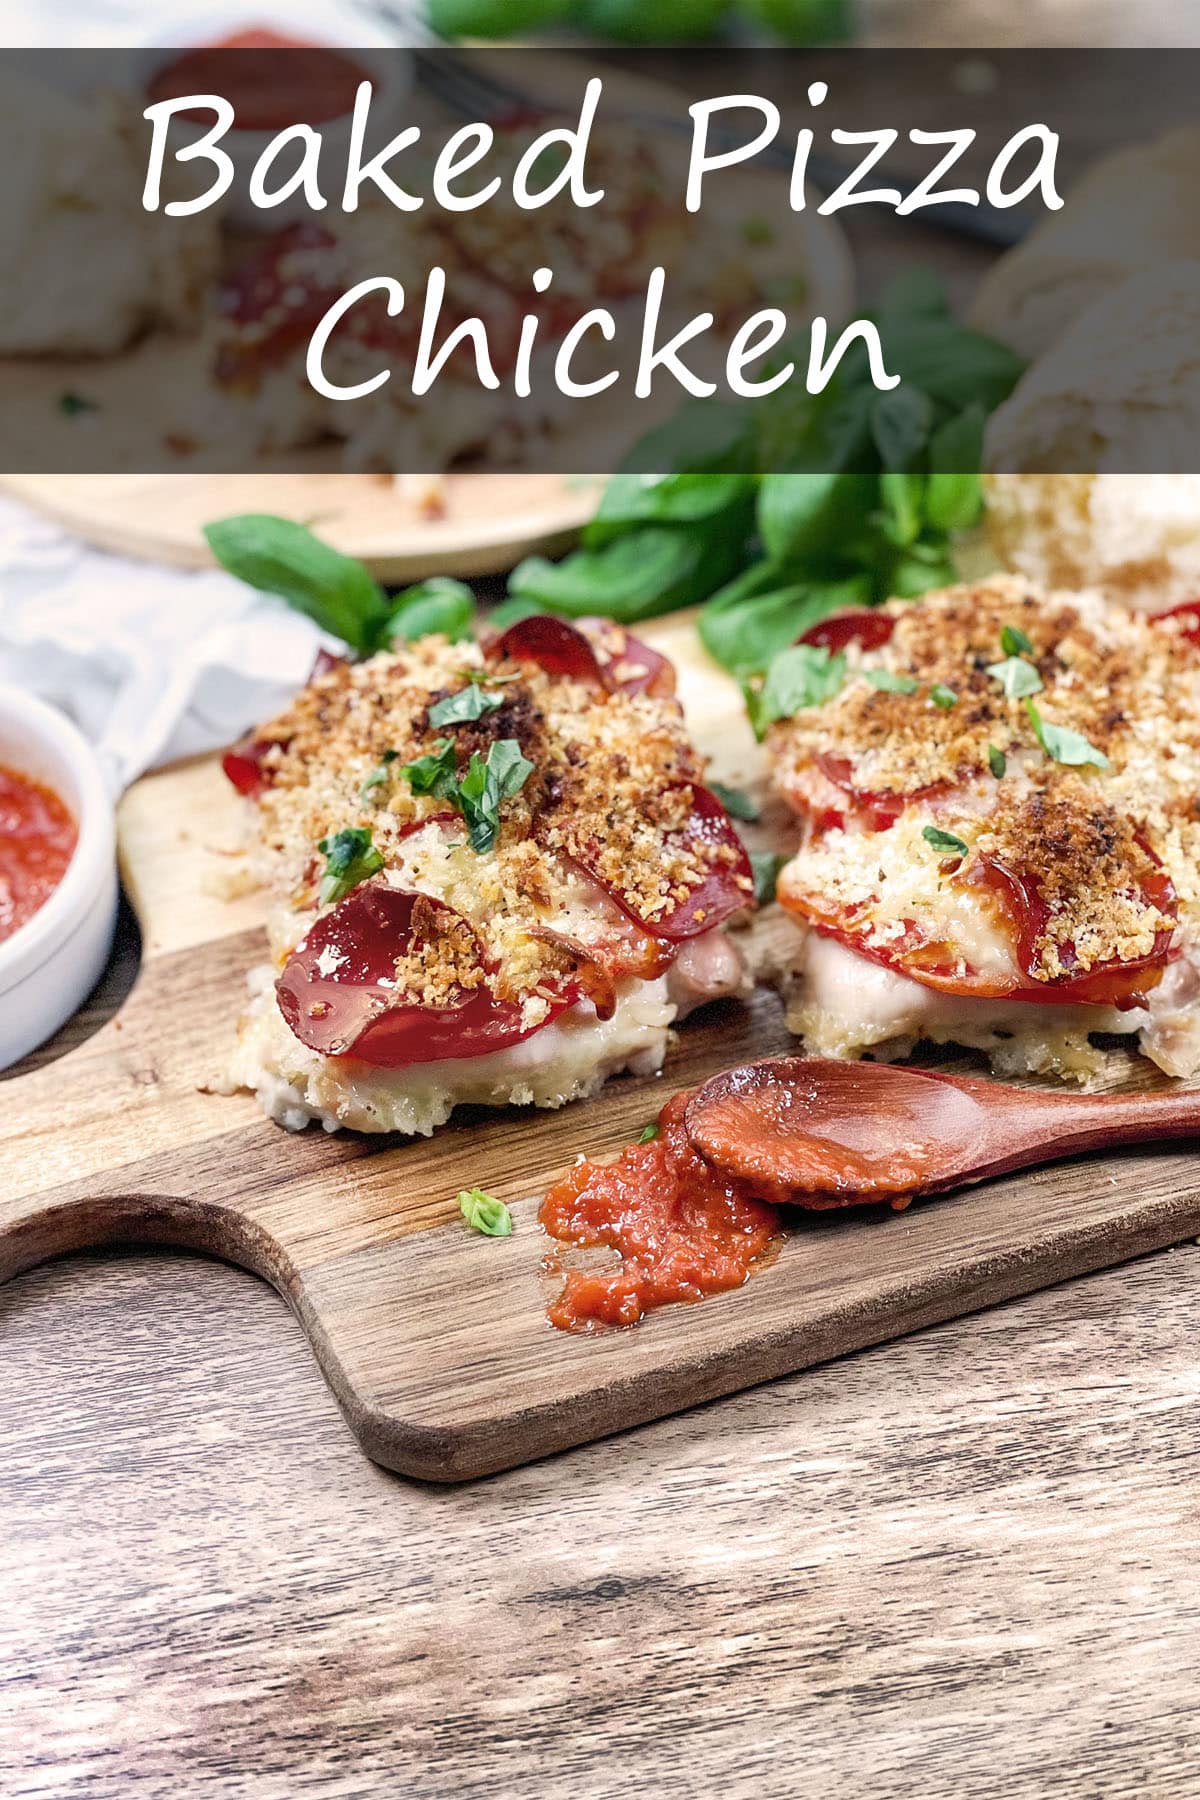 Baked Pizza Chicken